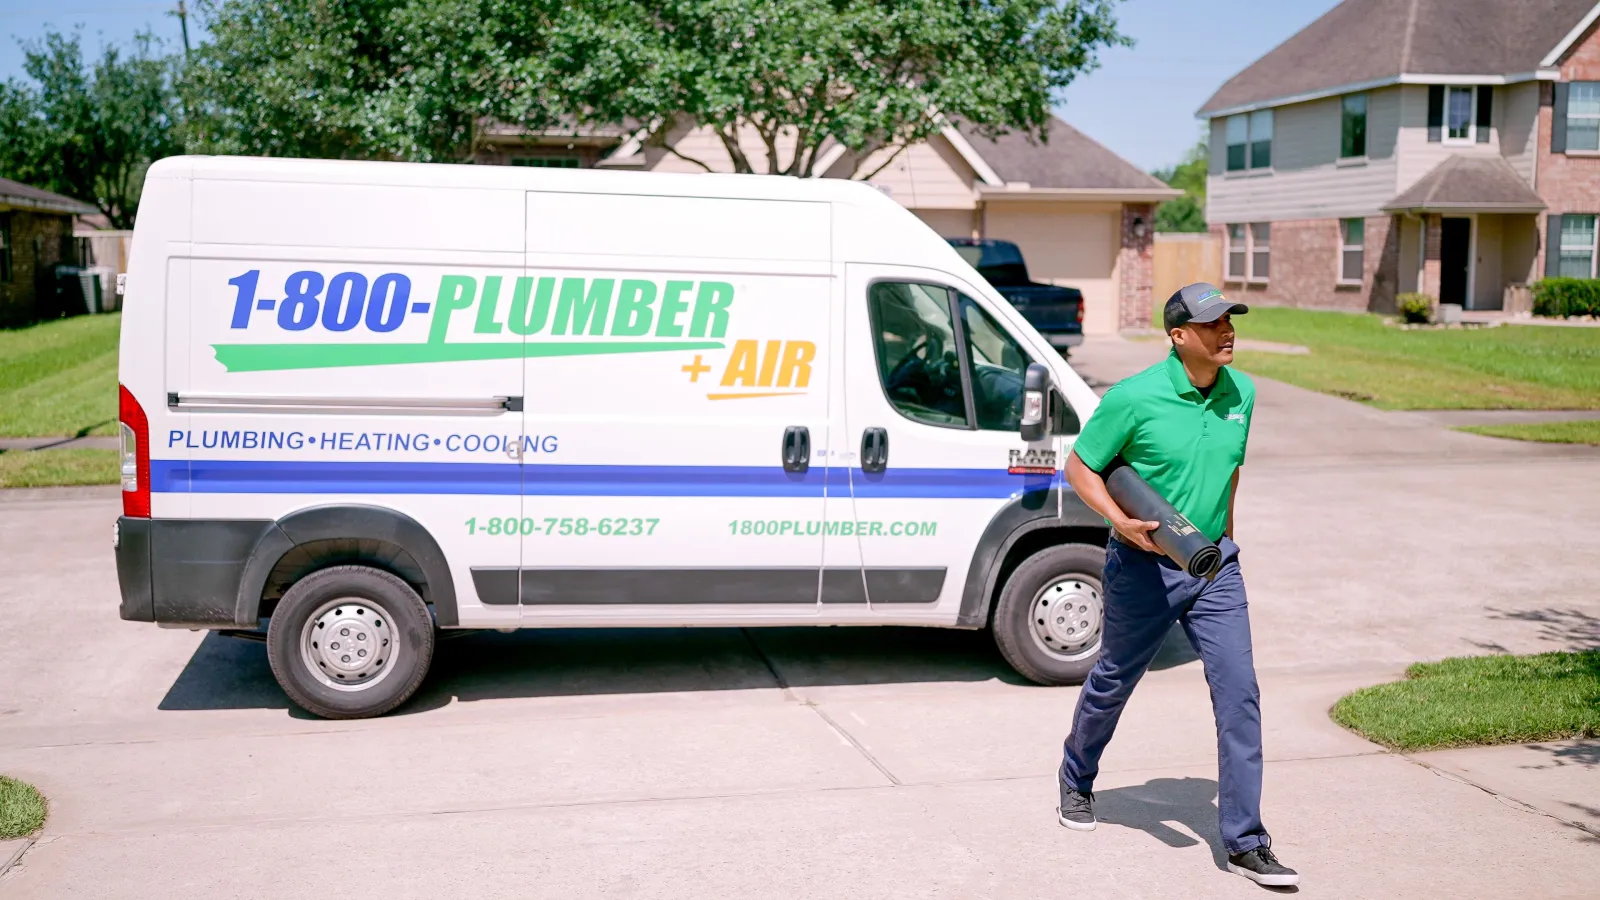 A Houston Plumber and a truck